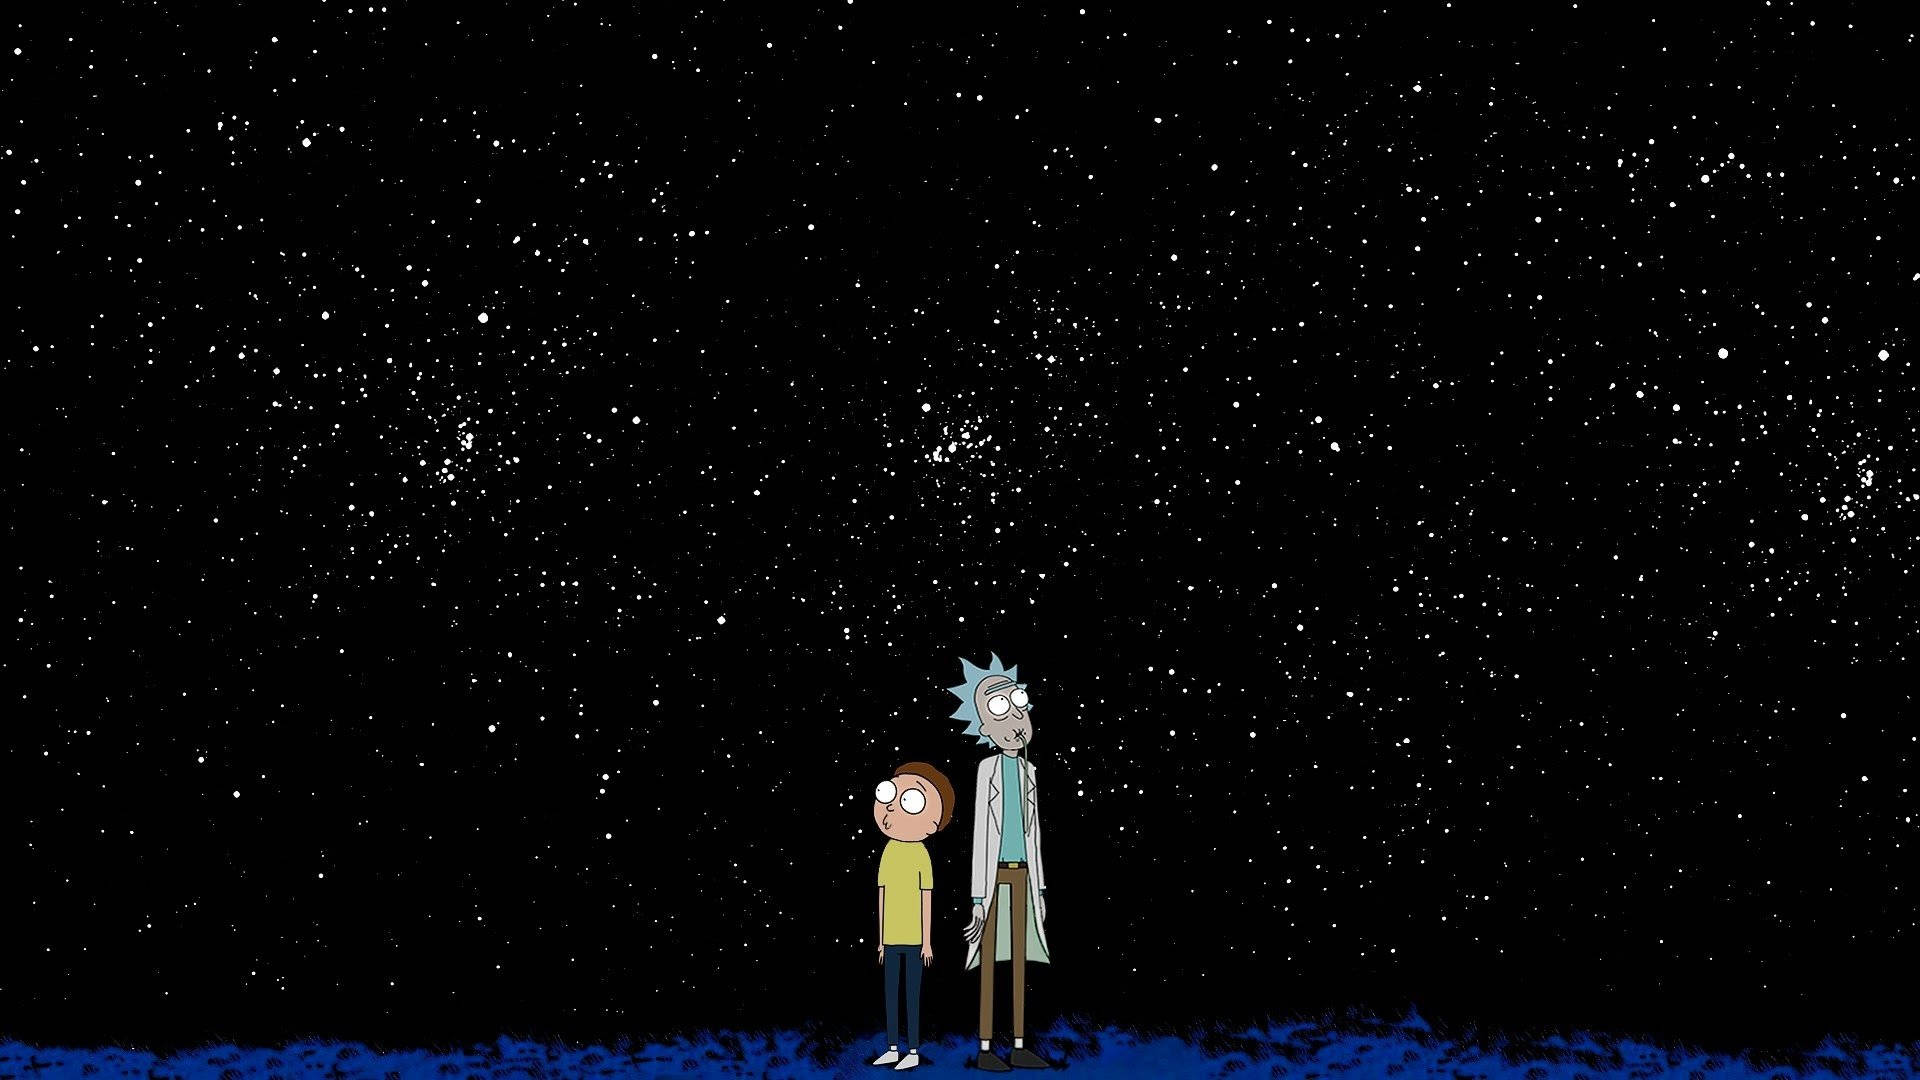 Rick And Morty Stargazing Wallpaper